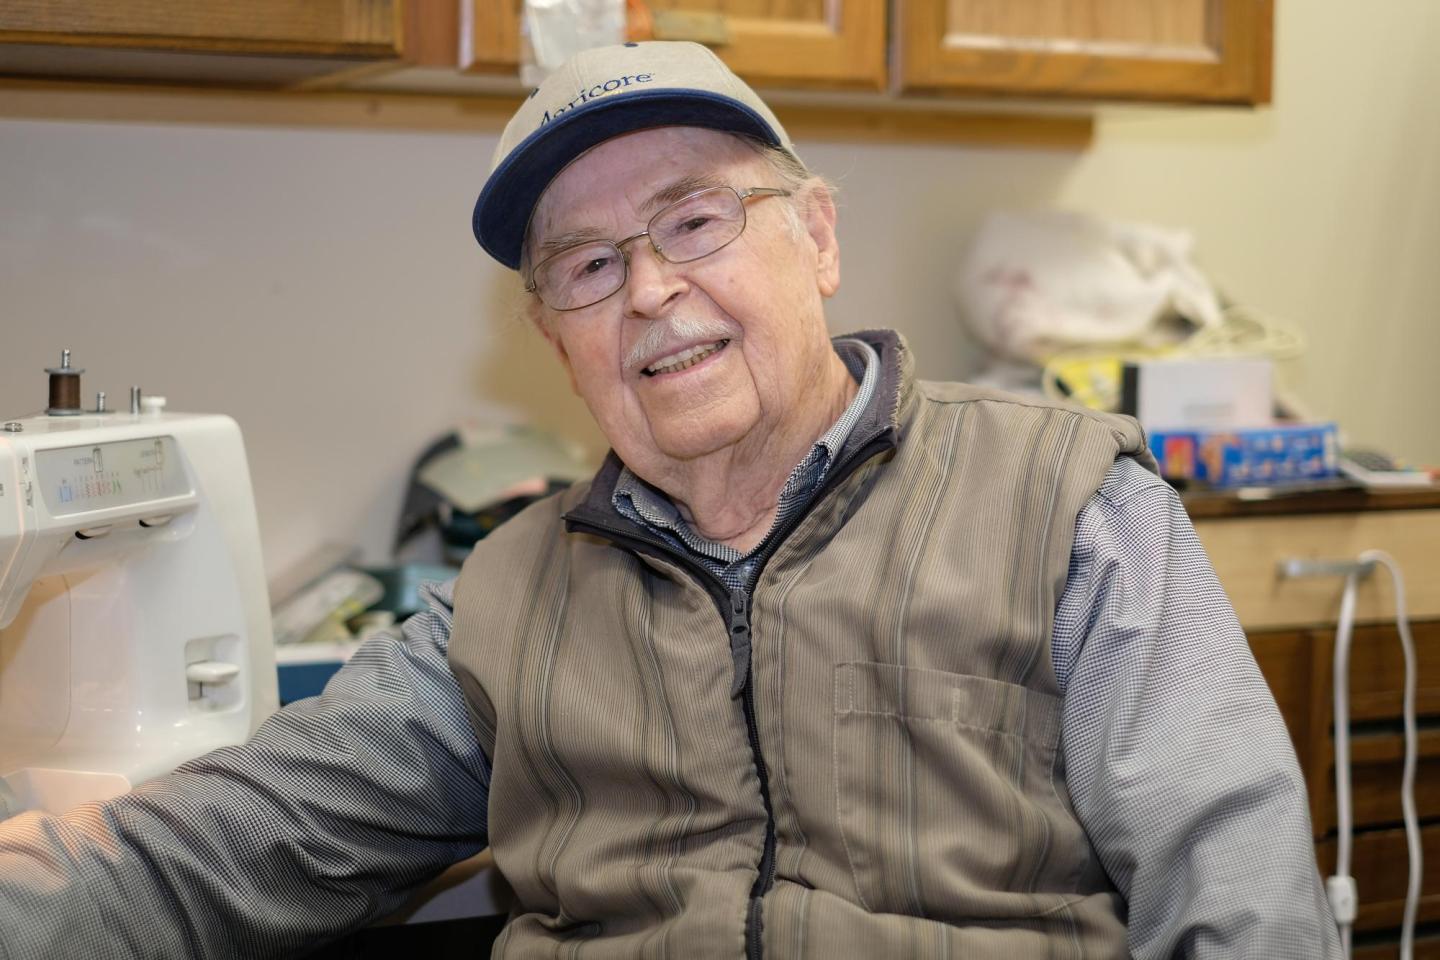 Jakob Hildebrandt has a long-standing history with MCC and continues to repair the Winkler shop's small equipment and appliance donations at the age of 93.